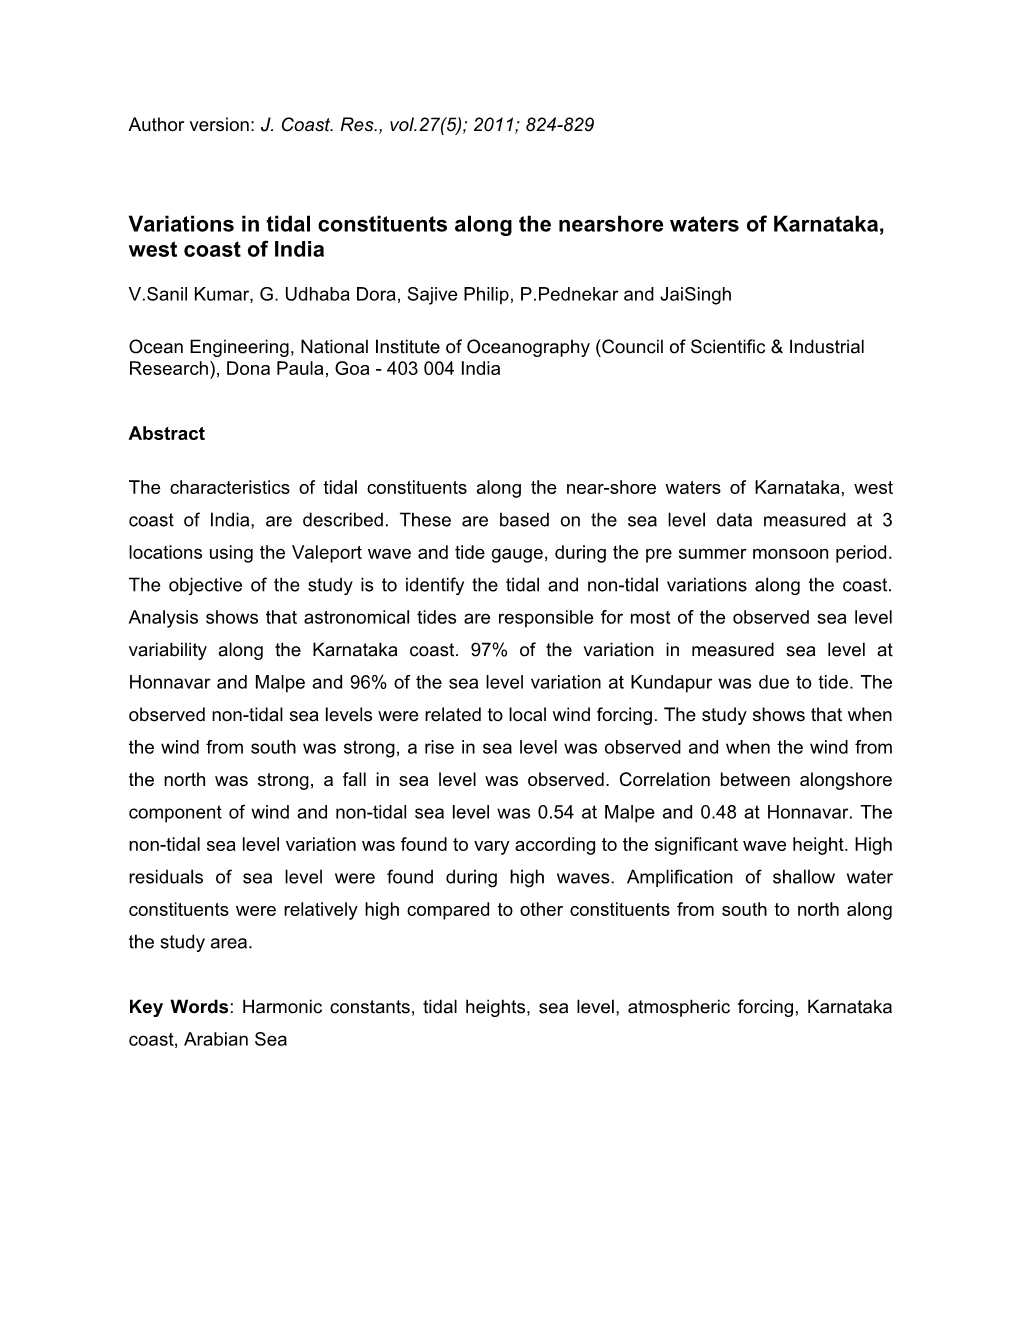 Variations in Tidal Constituents Along the Nearshore Waters of Karnataka, West Coast of India